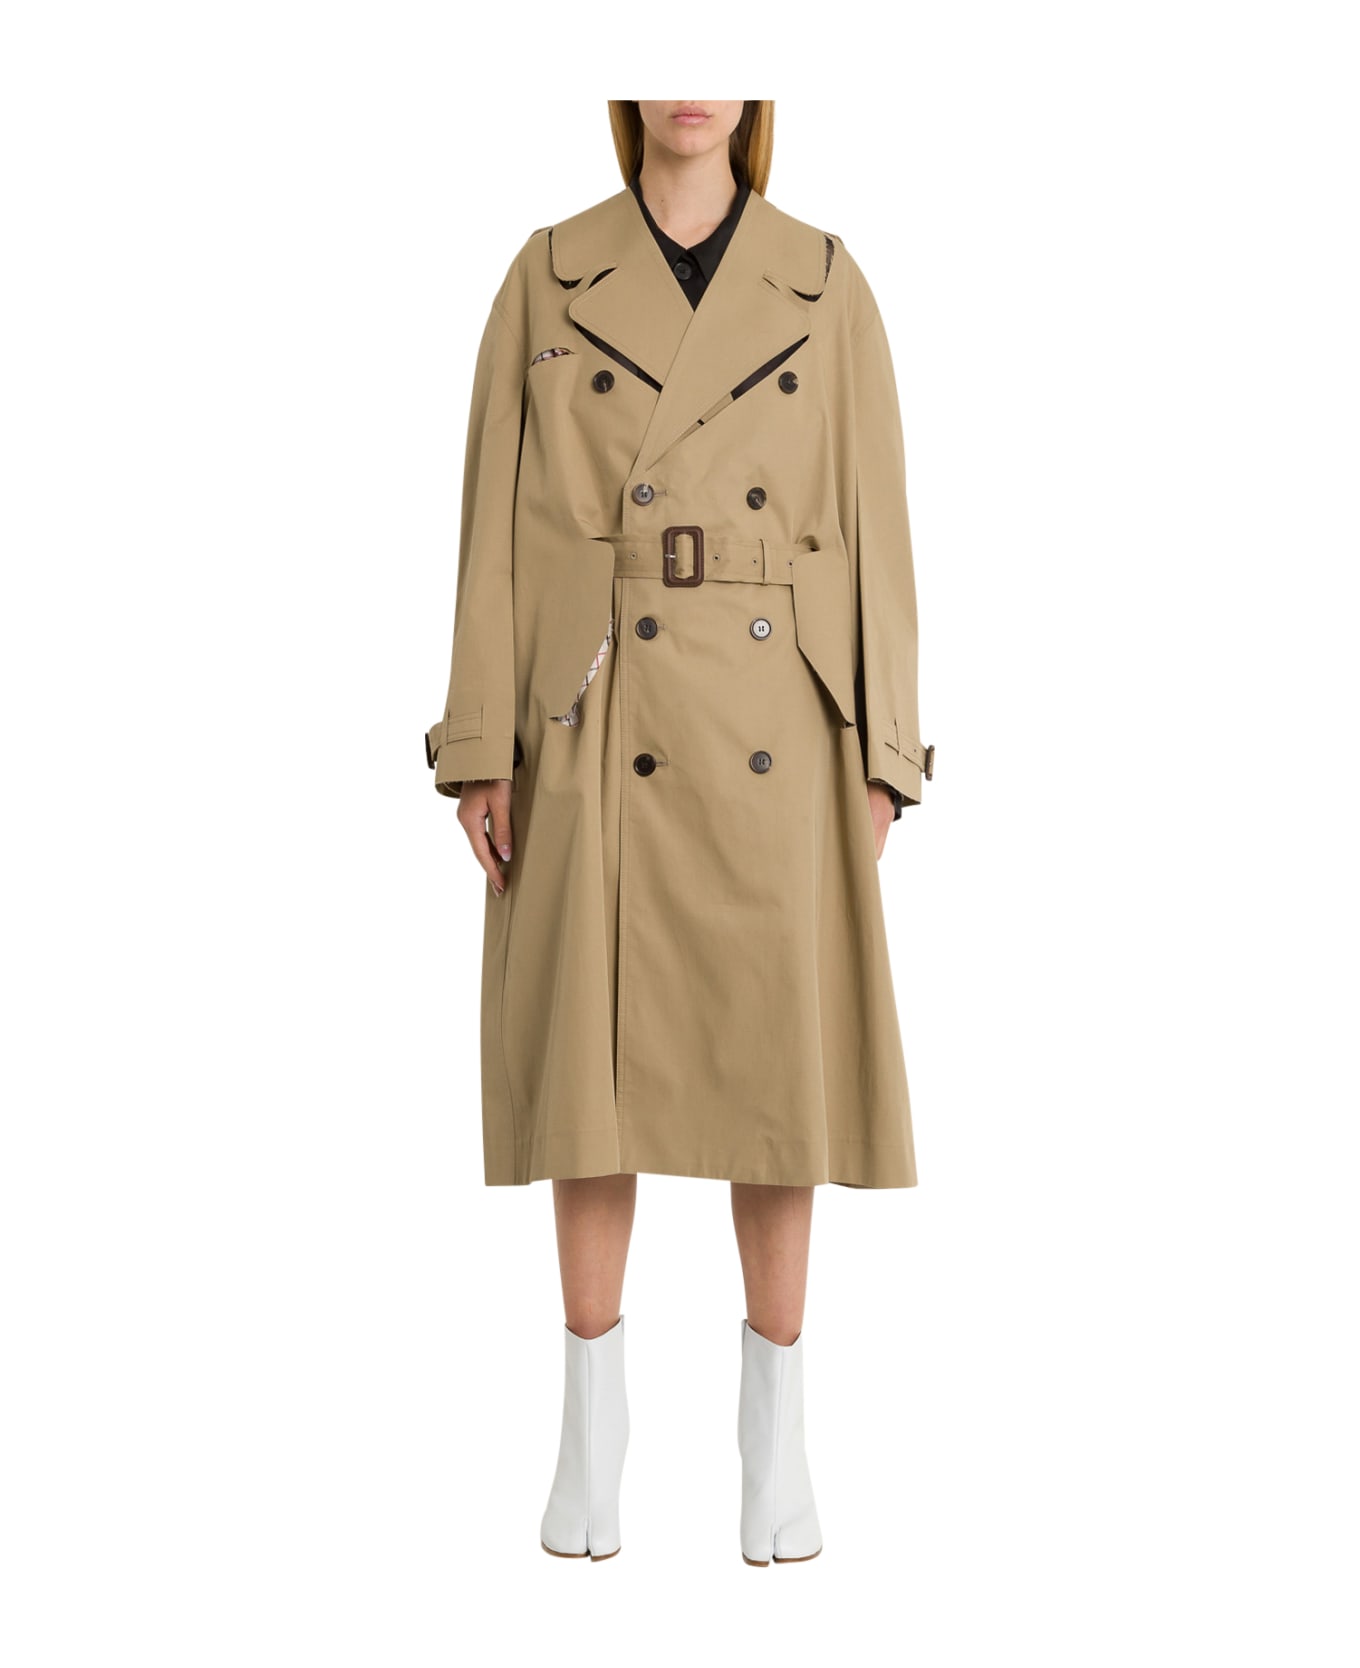 Maison Margiela Oversized Trench Coat With Cut-out Details | italist